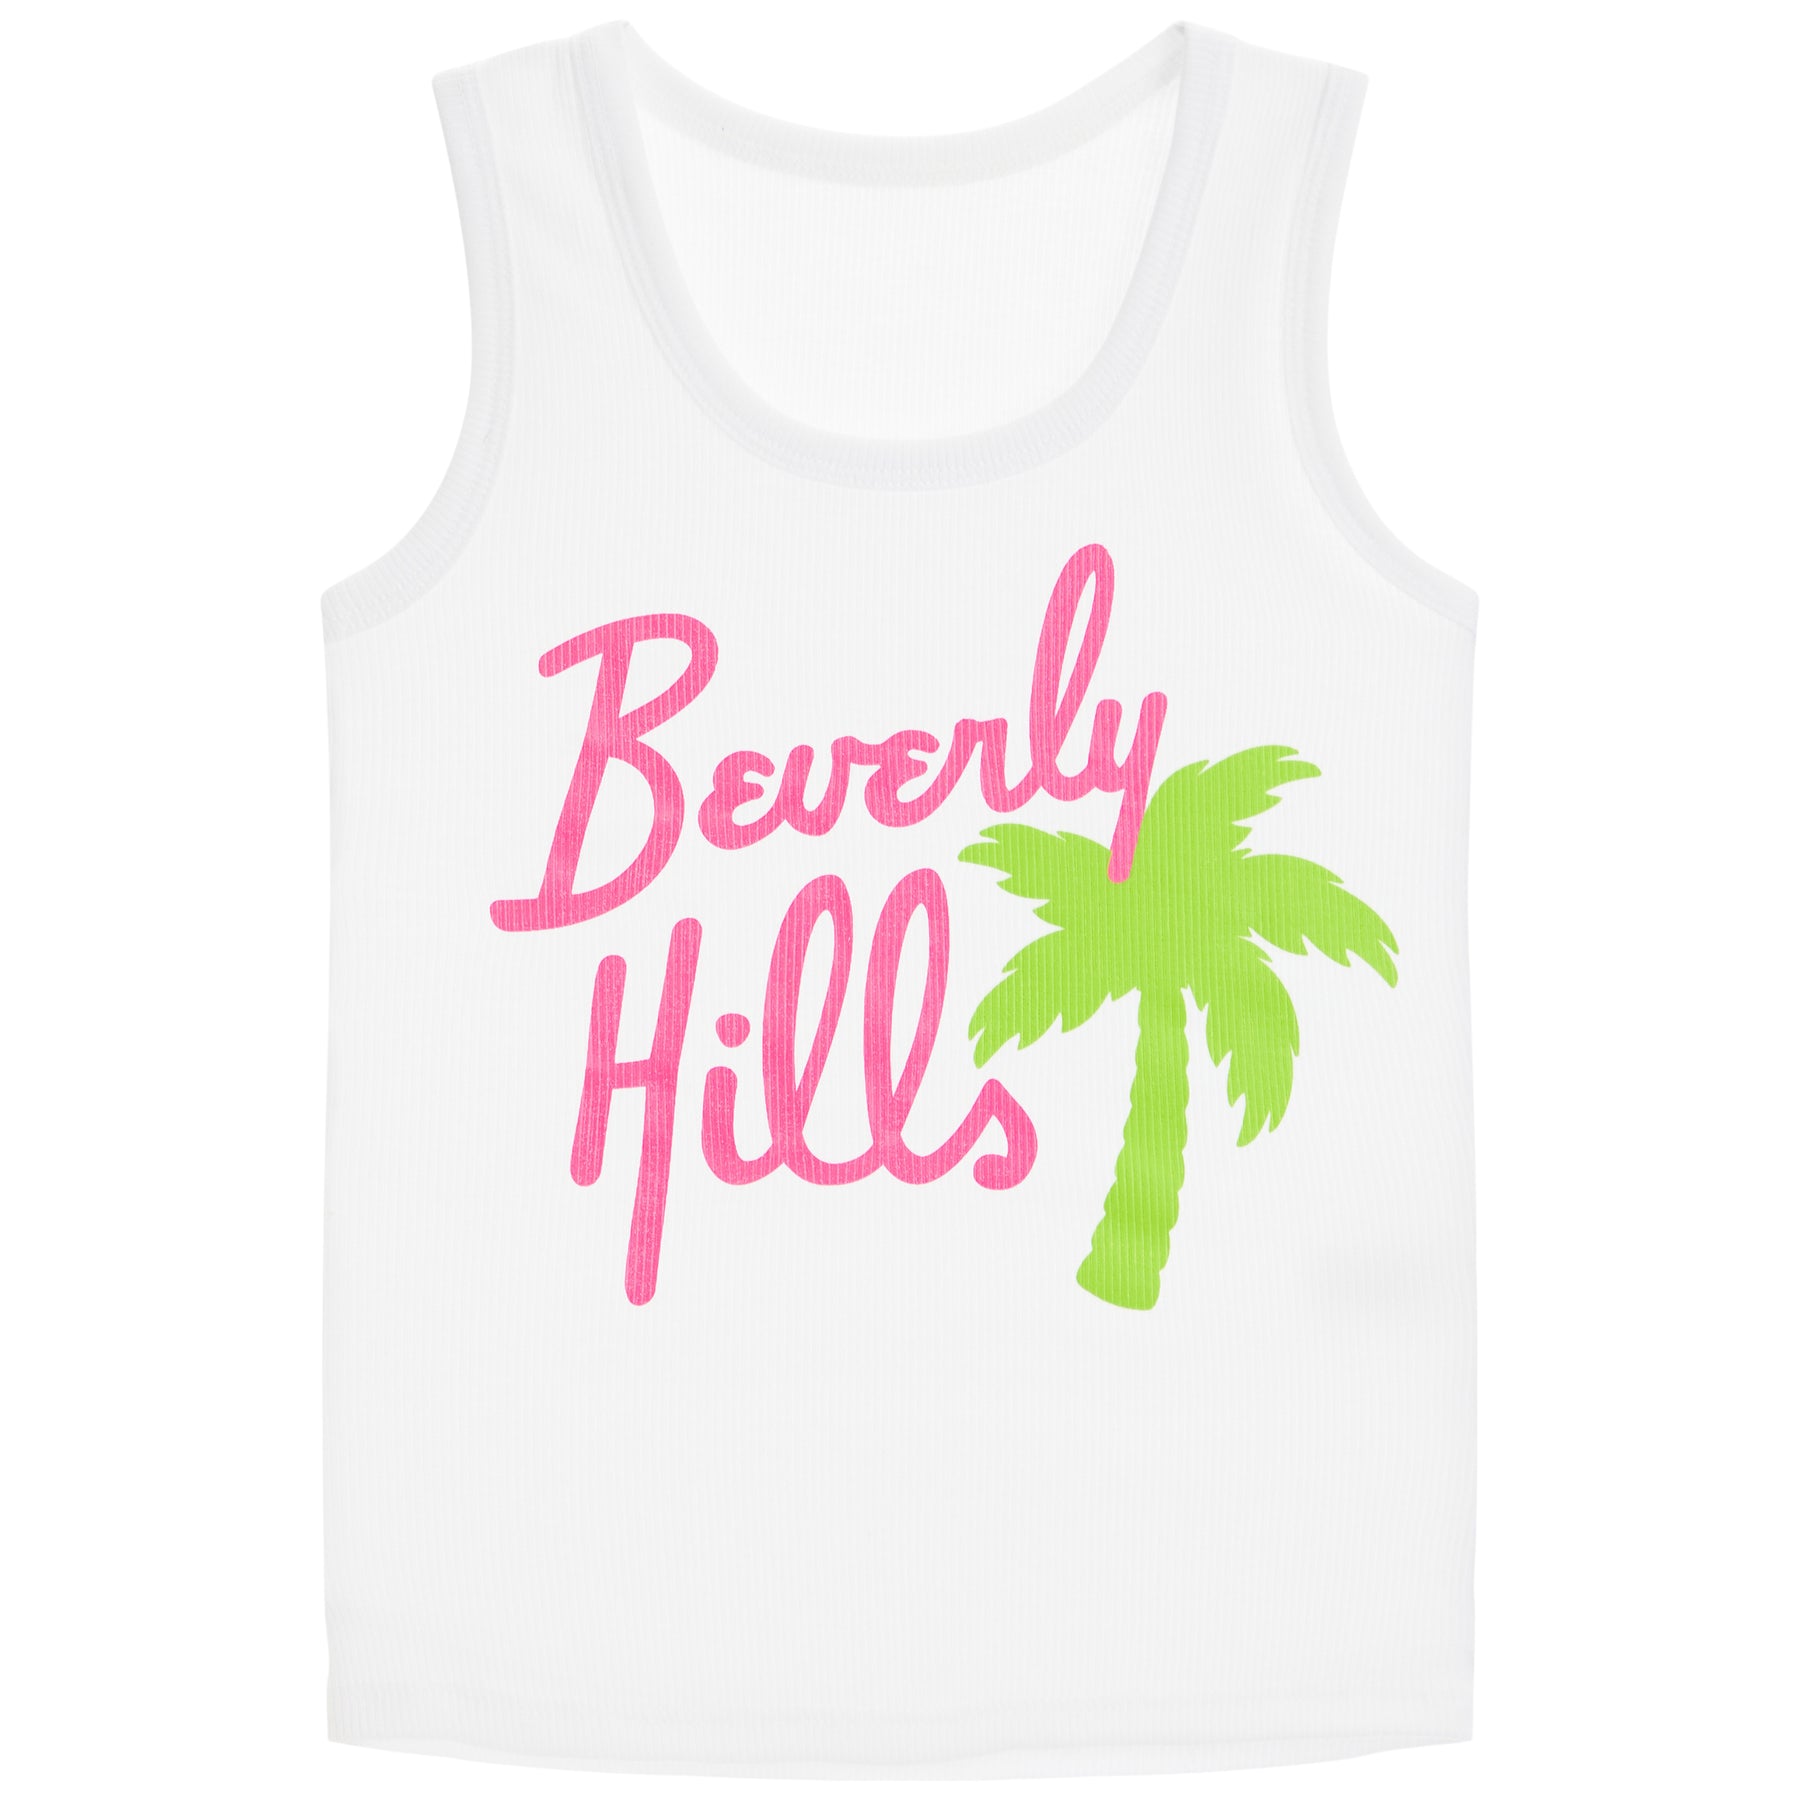 Beverly Hills Ribbed Tank